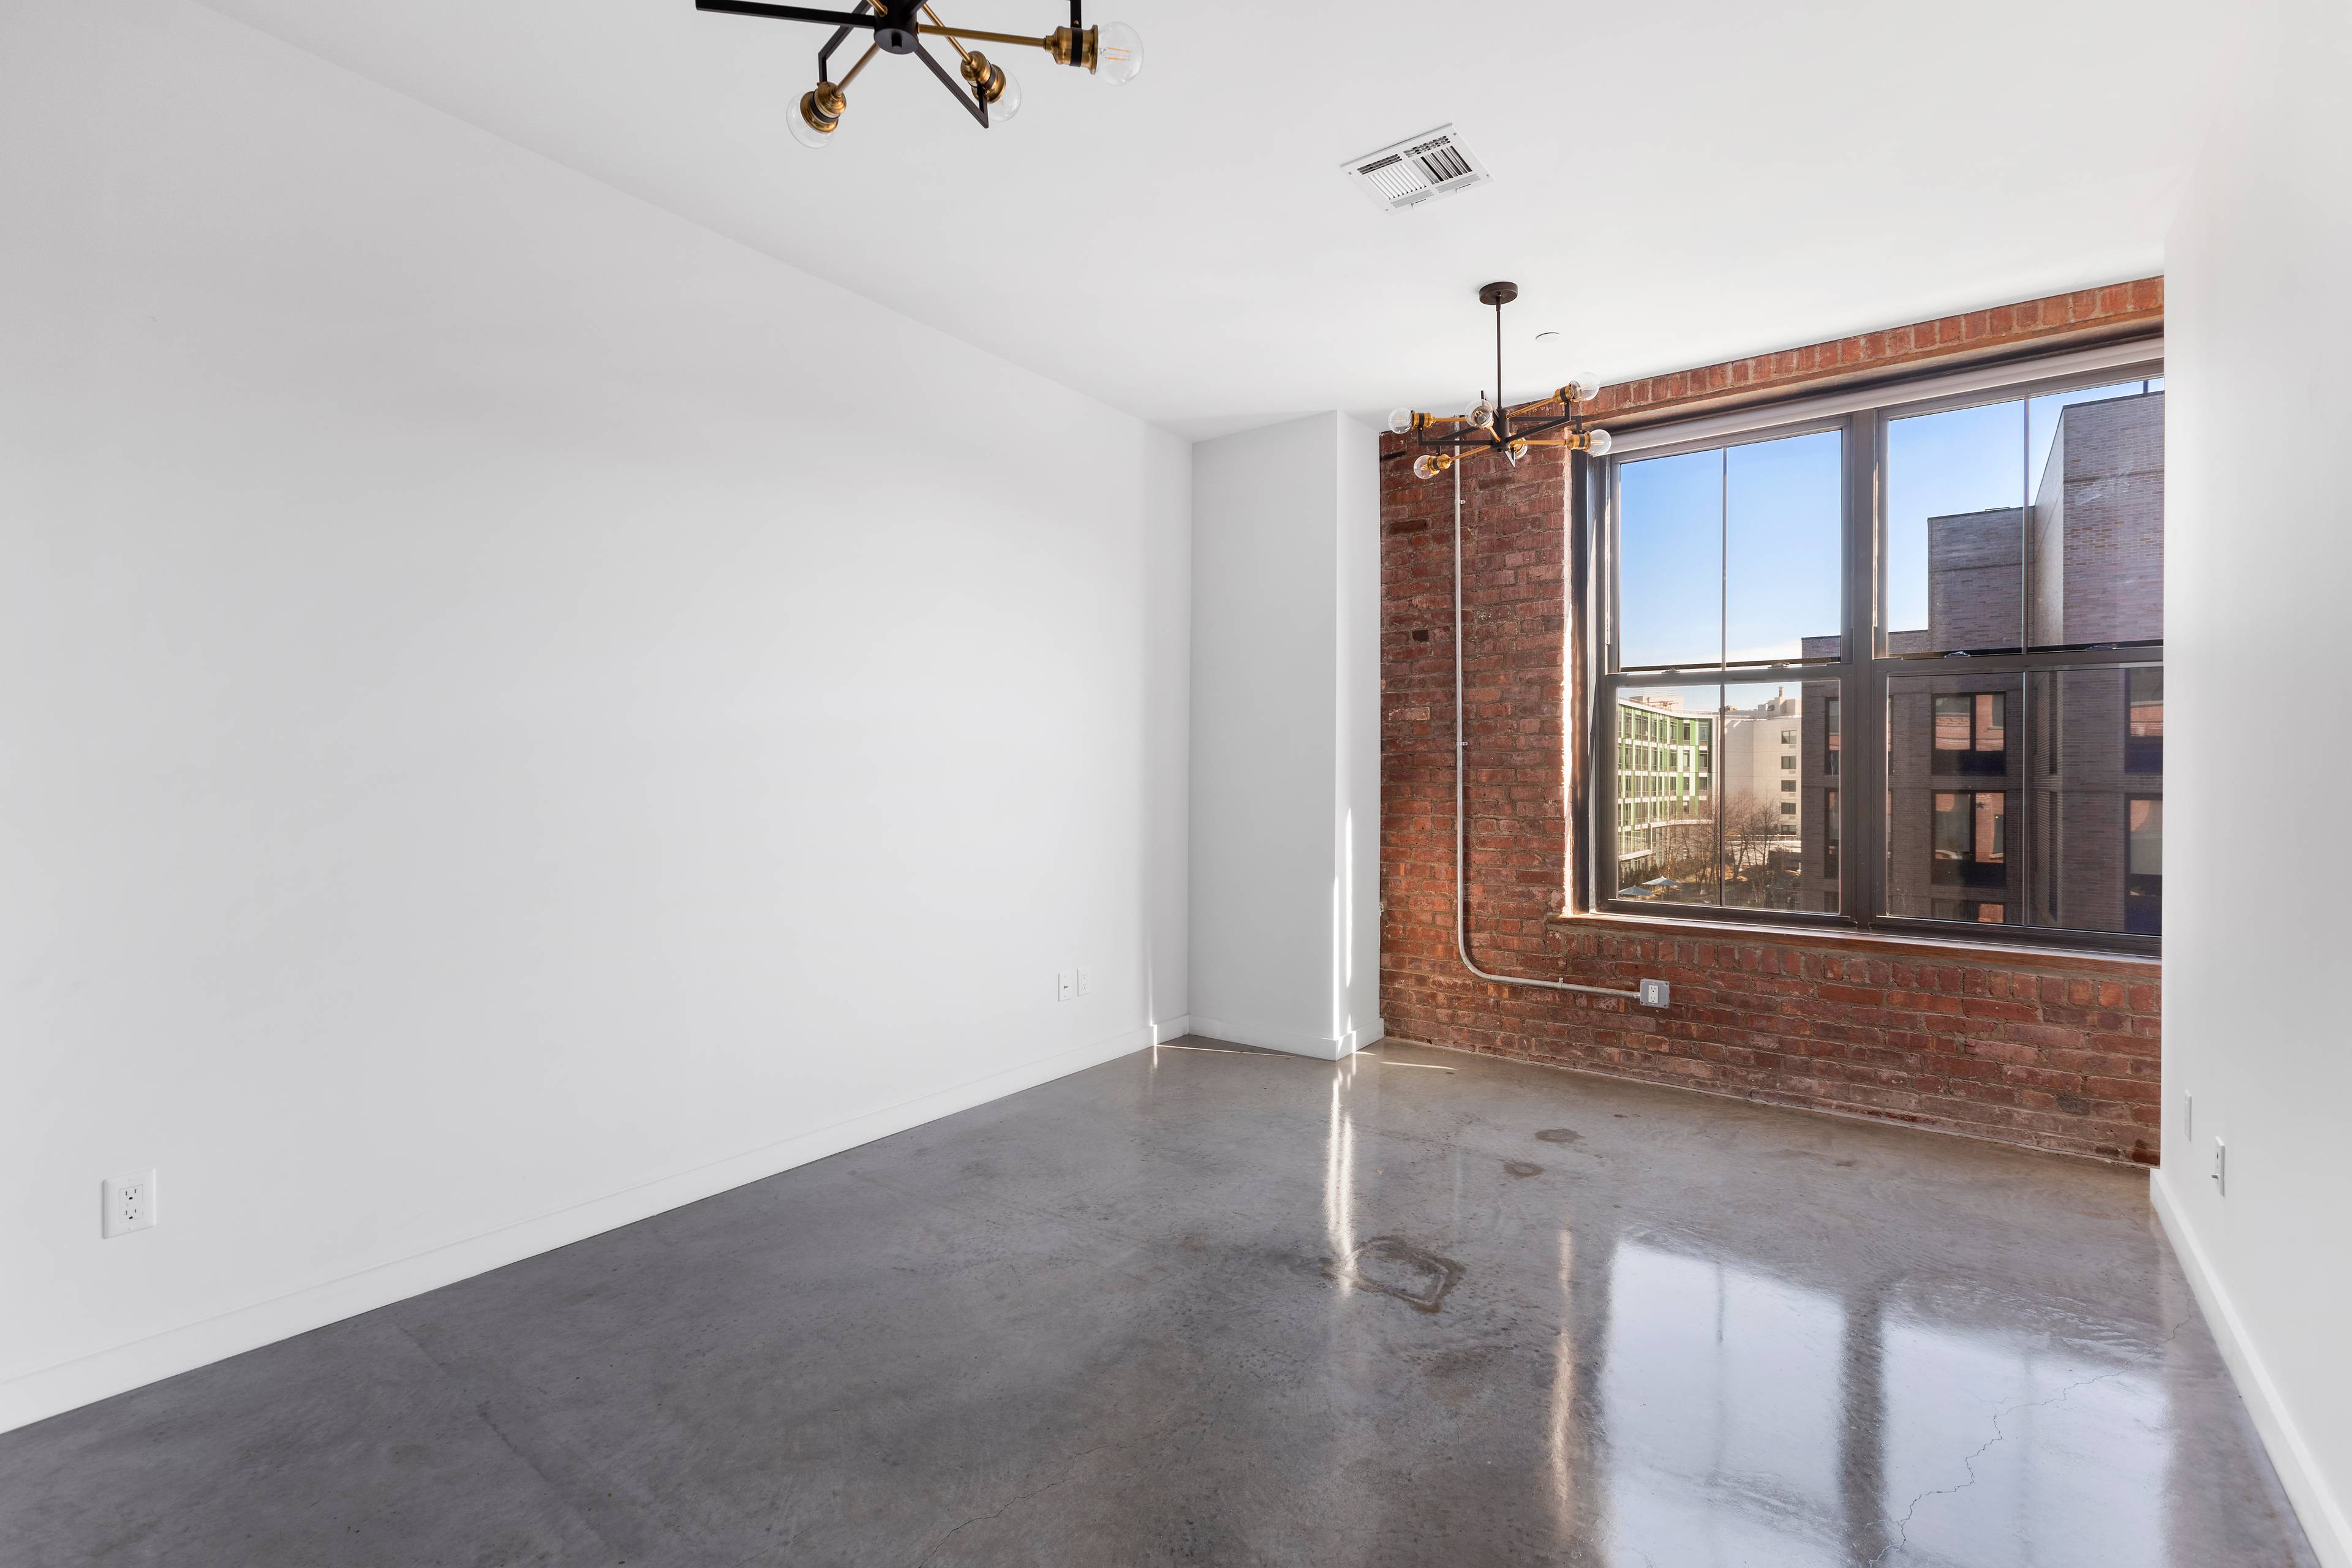 Loft 1B is a large one bedroom featuring high ceilings, exposed brick walls, and timber beams.